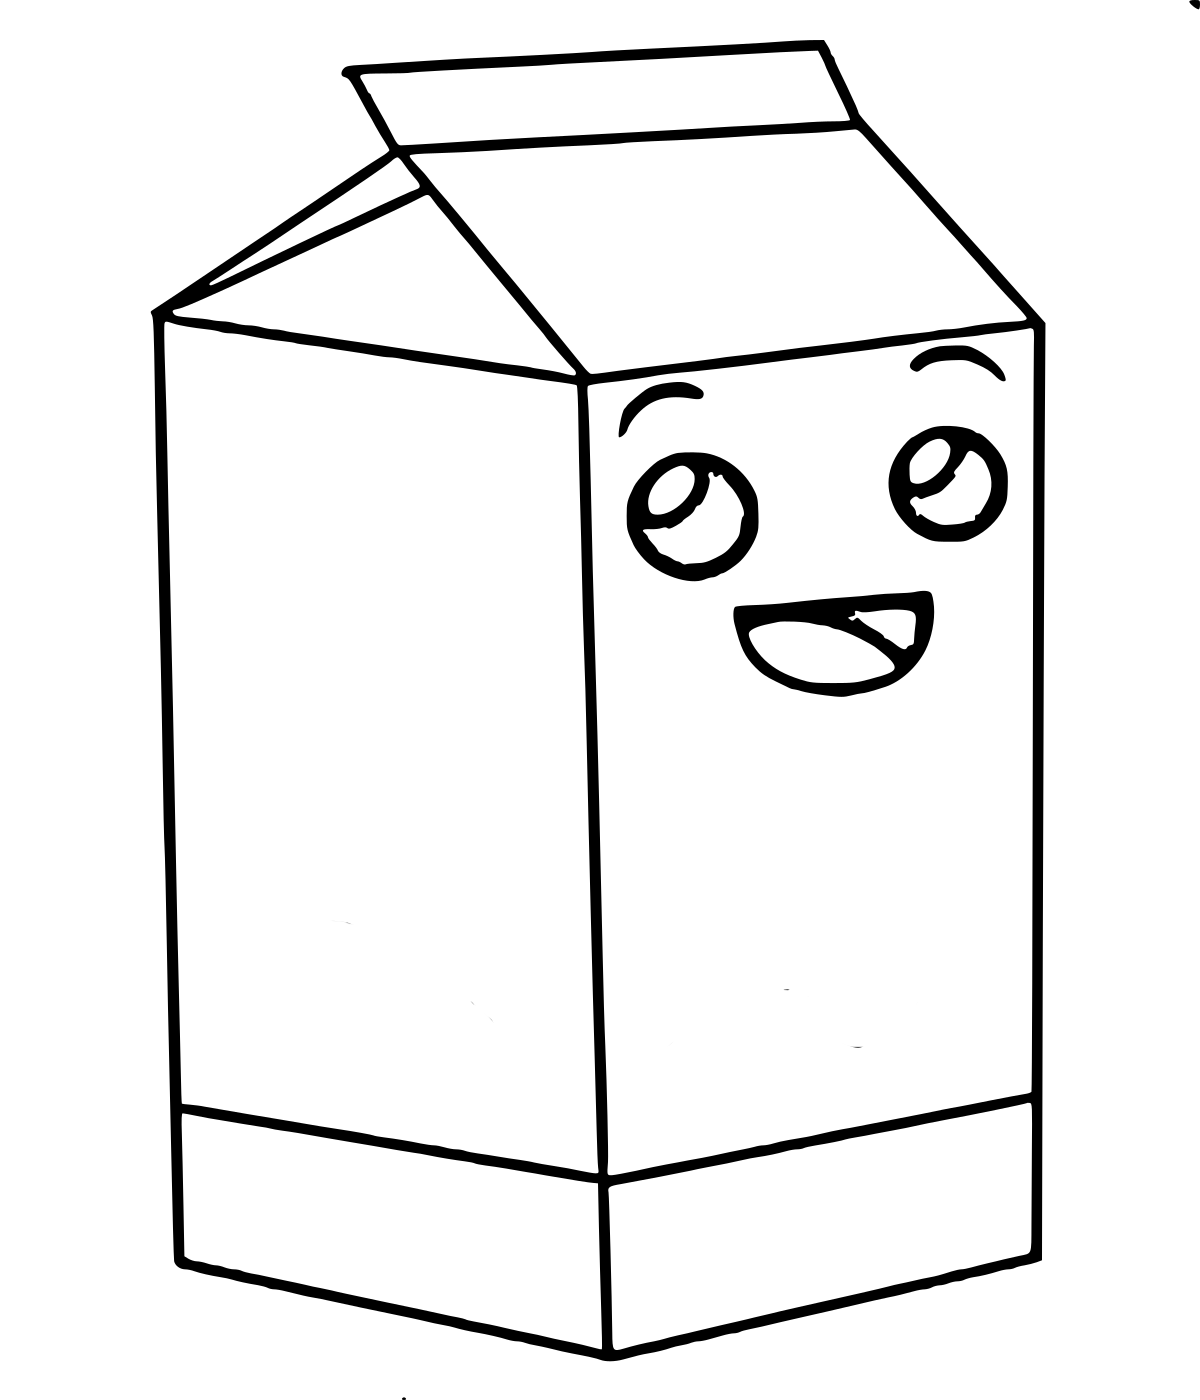 Milk Carton Drawing | Free download on ClipArtMag